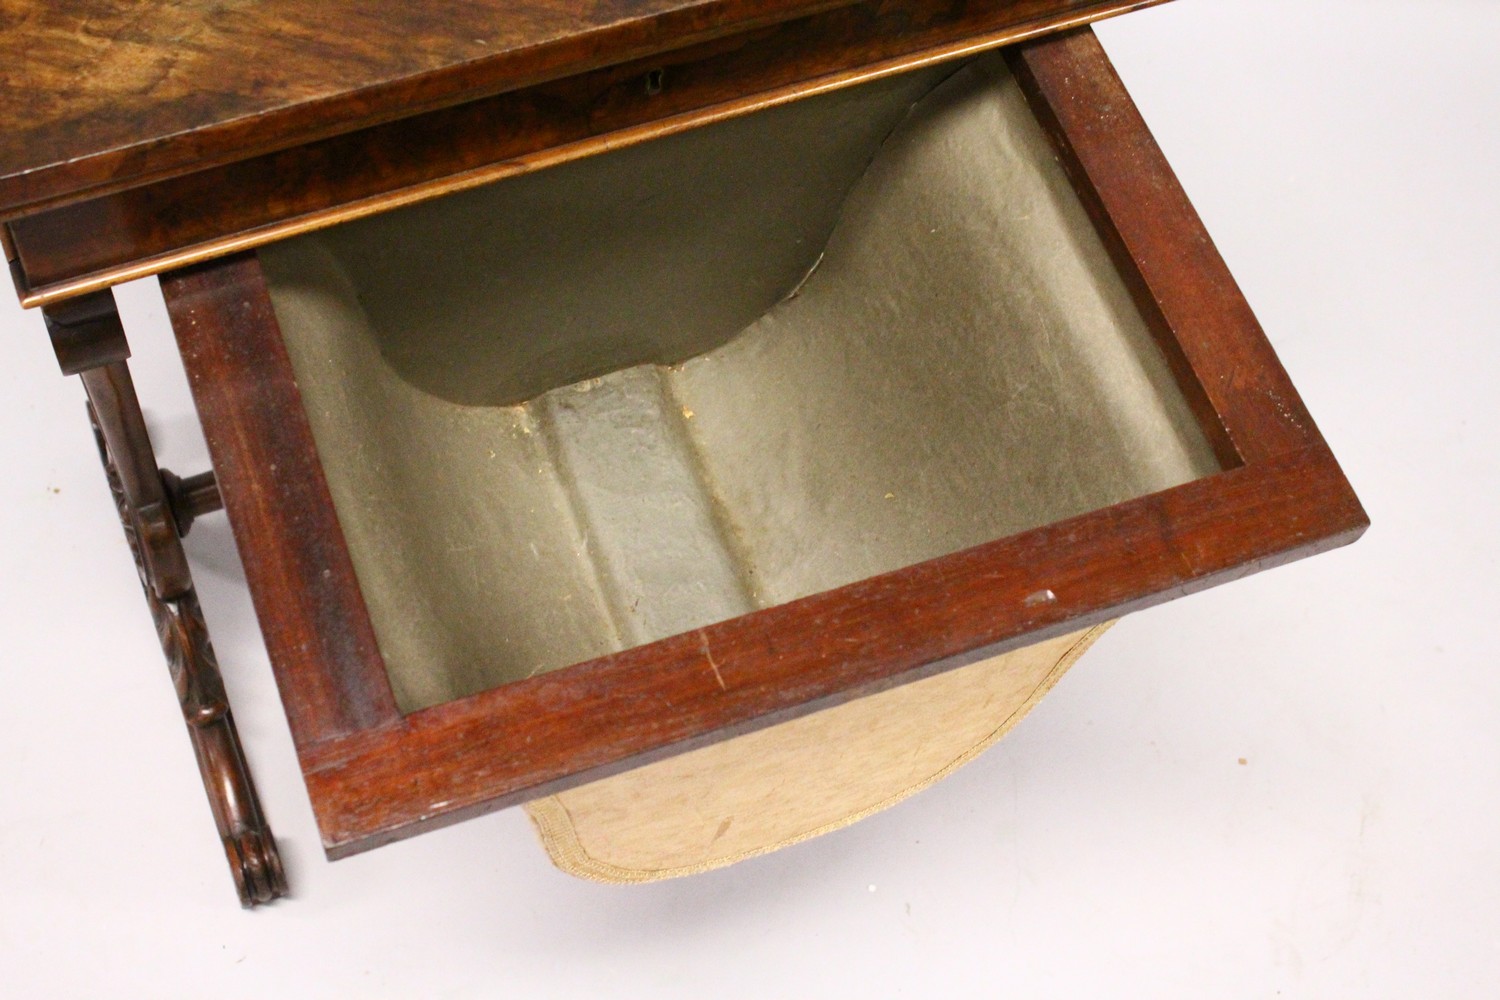 A VICTORIAN WALNUT WORK TABLE, with galleried top over a single drawer and work bag, on curving - Image 2 of 3